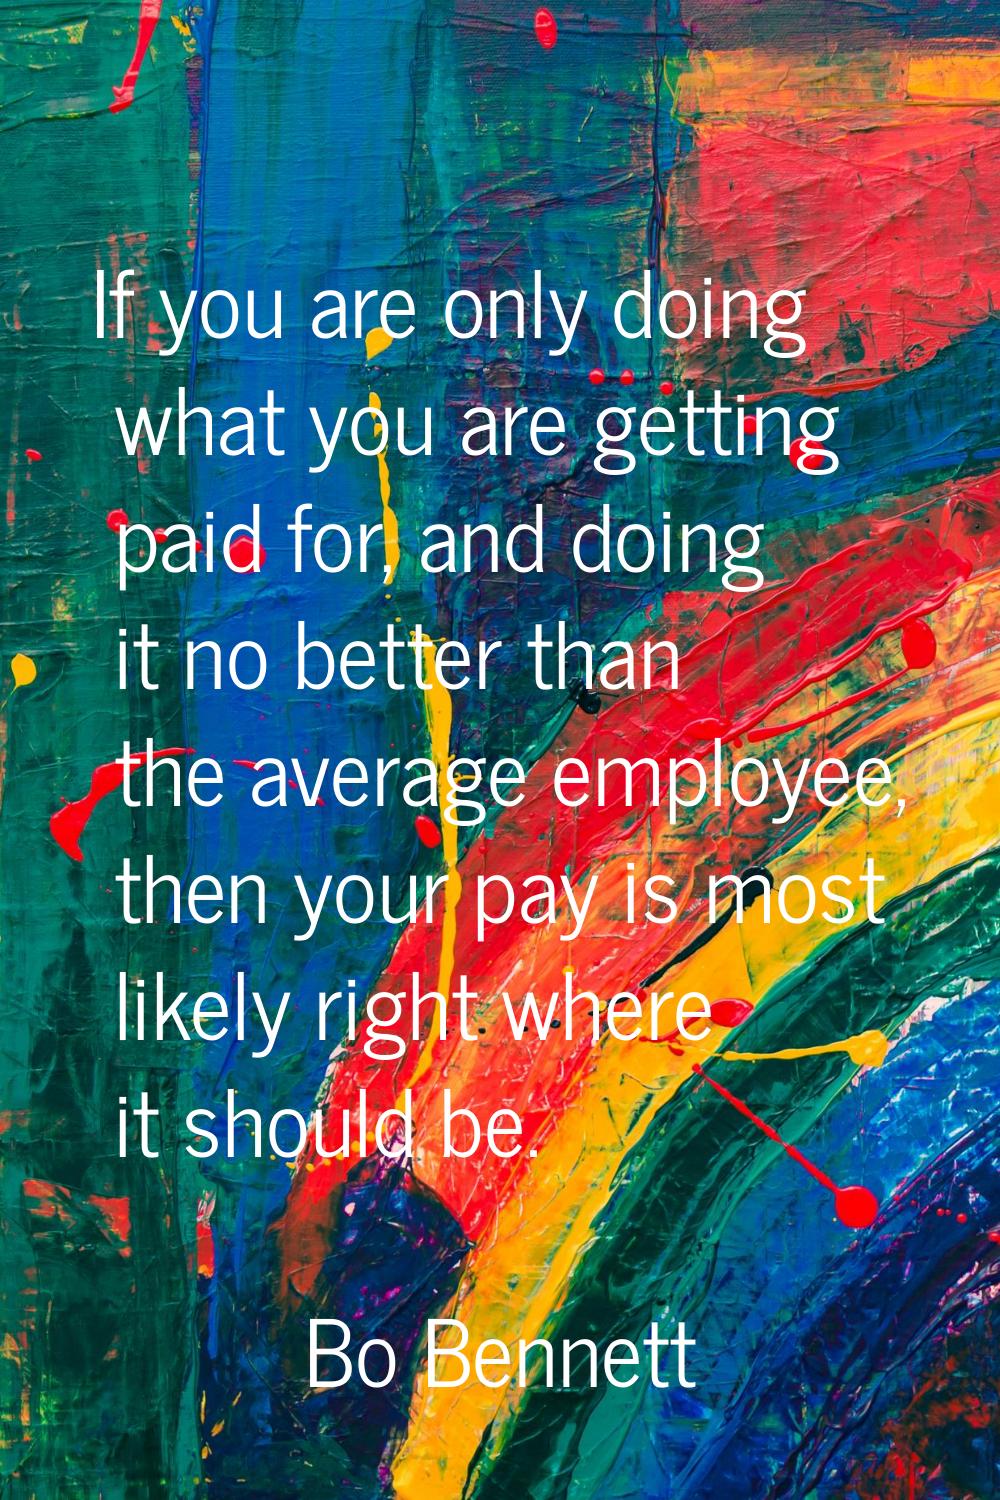 If you are only doing what you are getting paid for, and doing it no better than the average employ